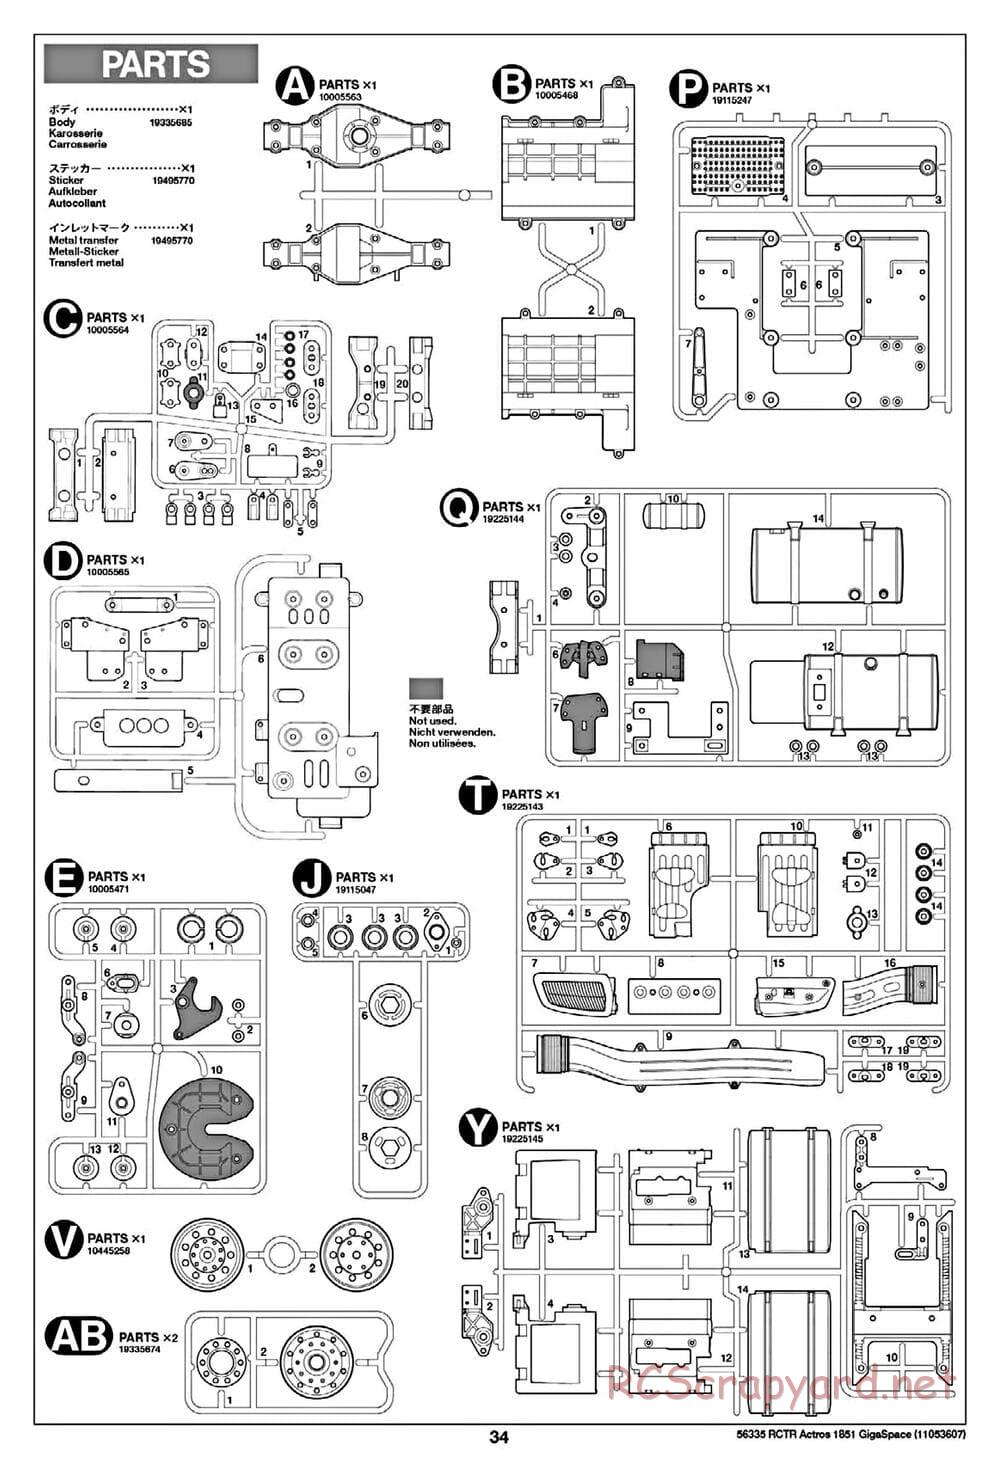 Tamiya - Mercedes-Benz Actros 1851 Gigaspace Tractor Truck Chassis - Manual - Page 34